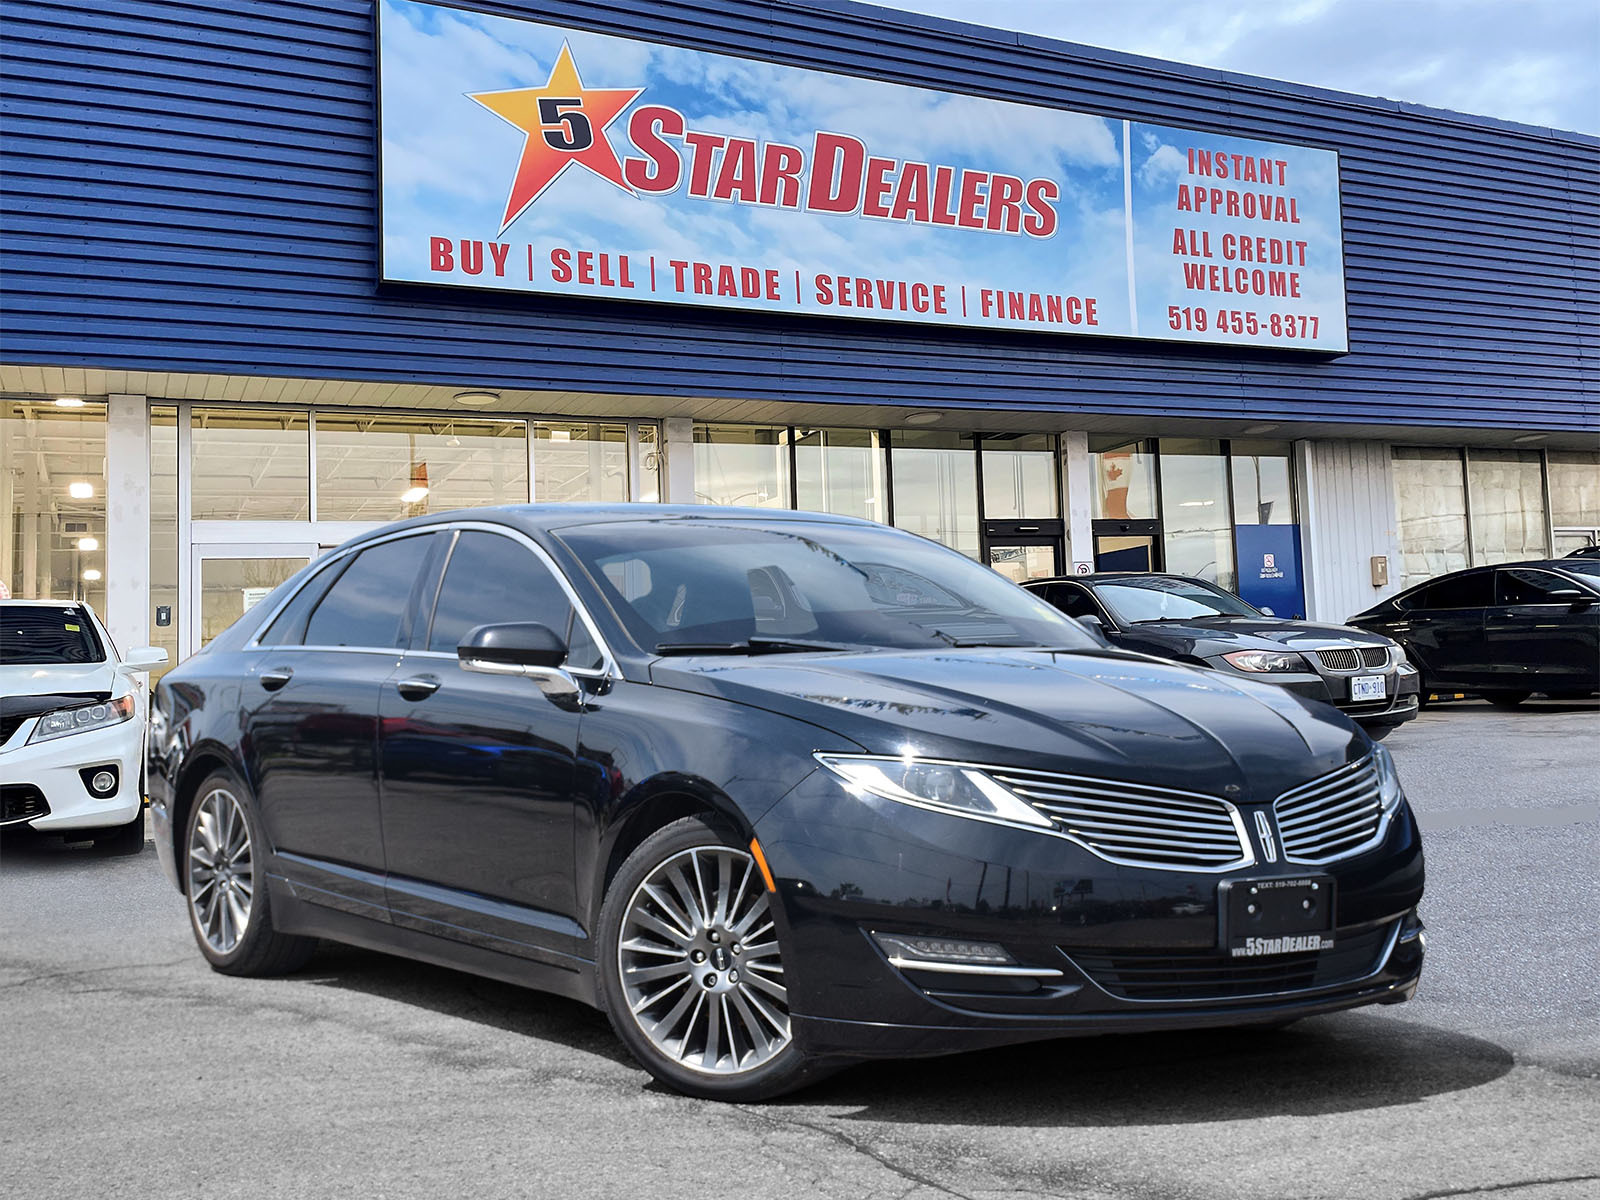 2016 Lincoln MKZ NAV LEATHER SUNROOF LOADED! WE FINANCE ALL CREDIT